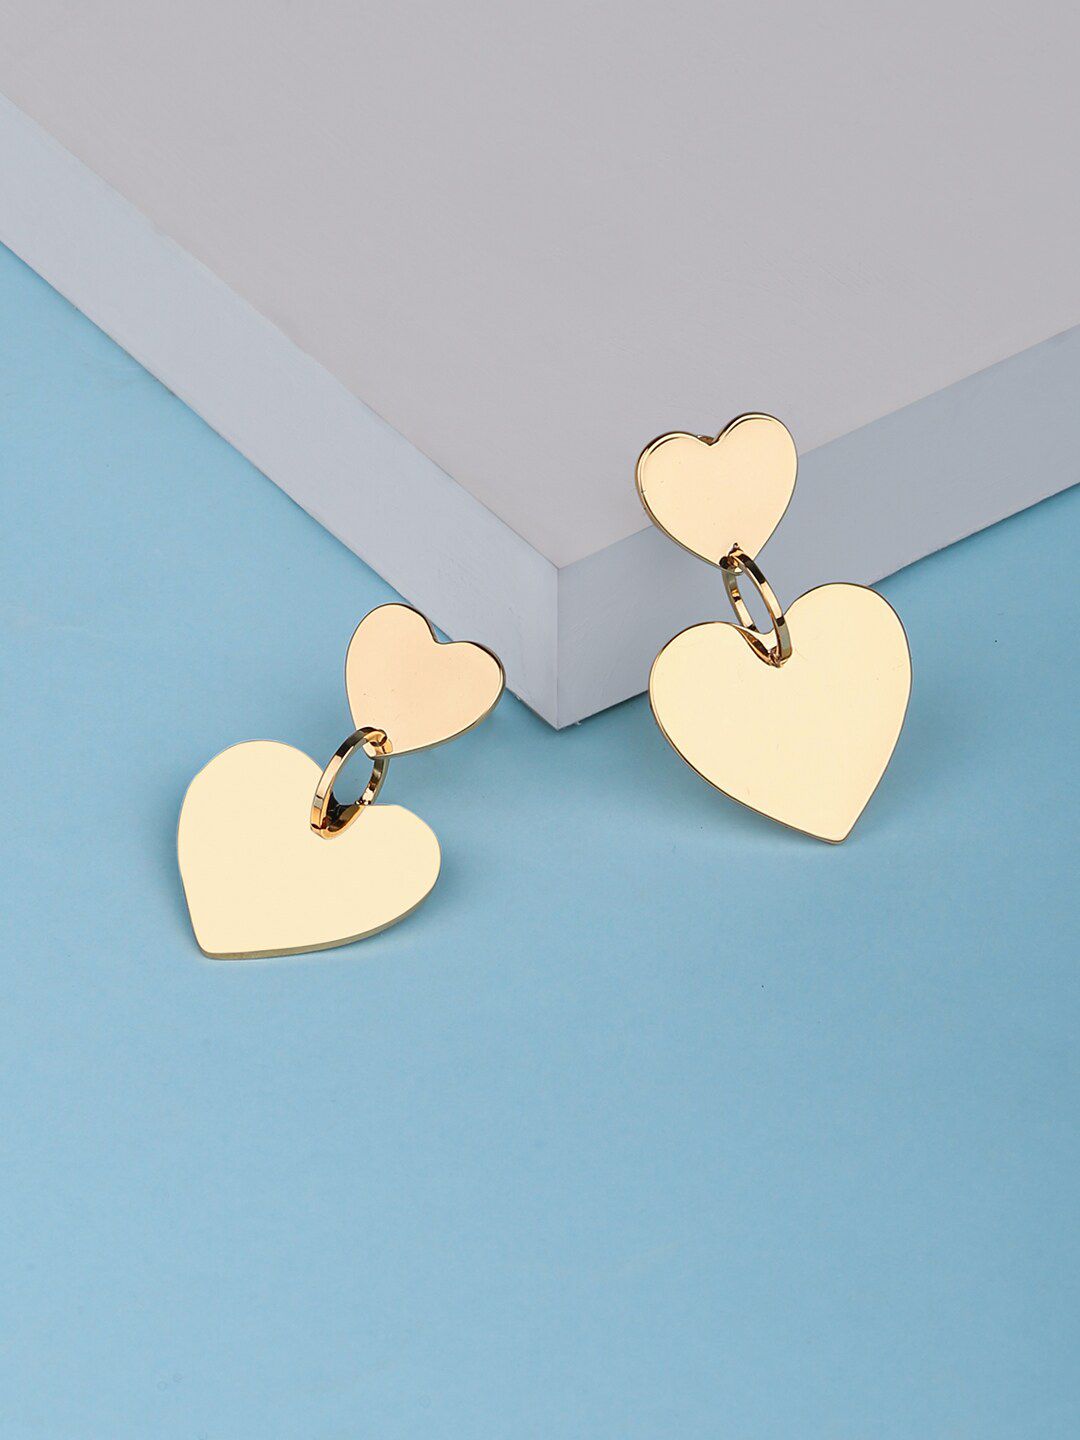 Lilly & sparkle Gold-Toned Heart Shaped Drop Earrings Price in India